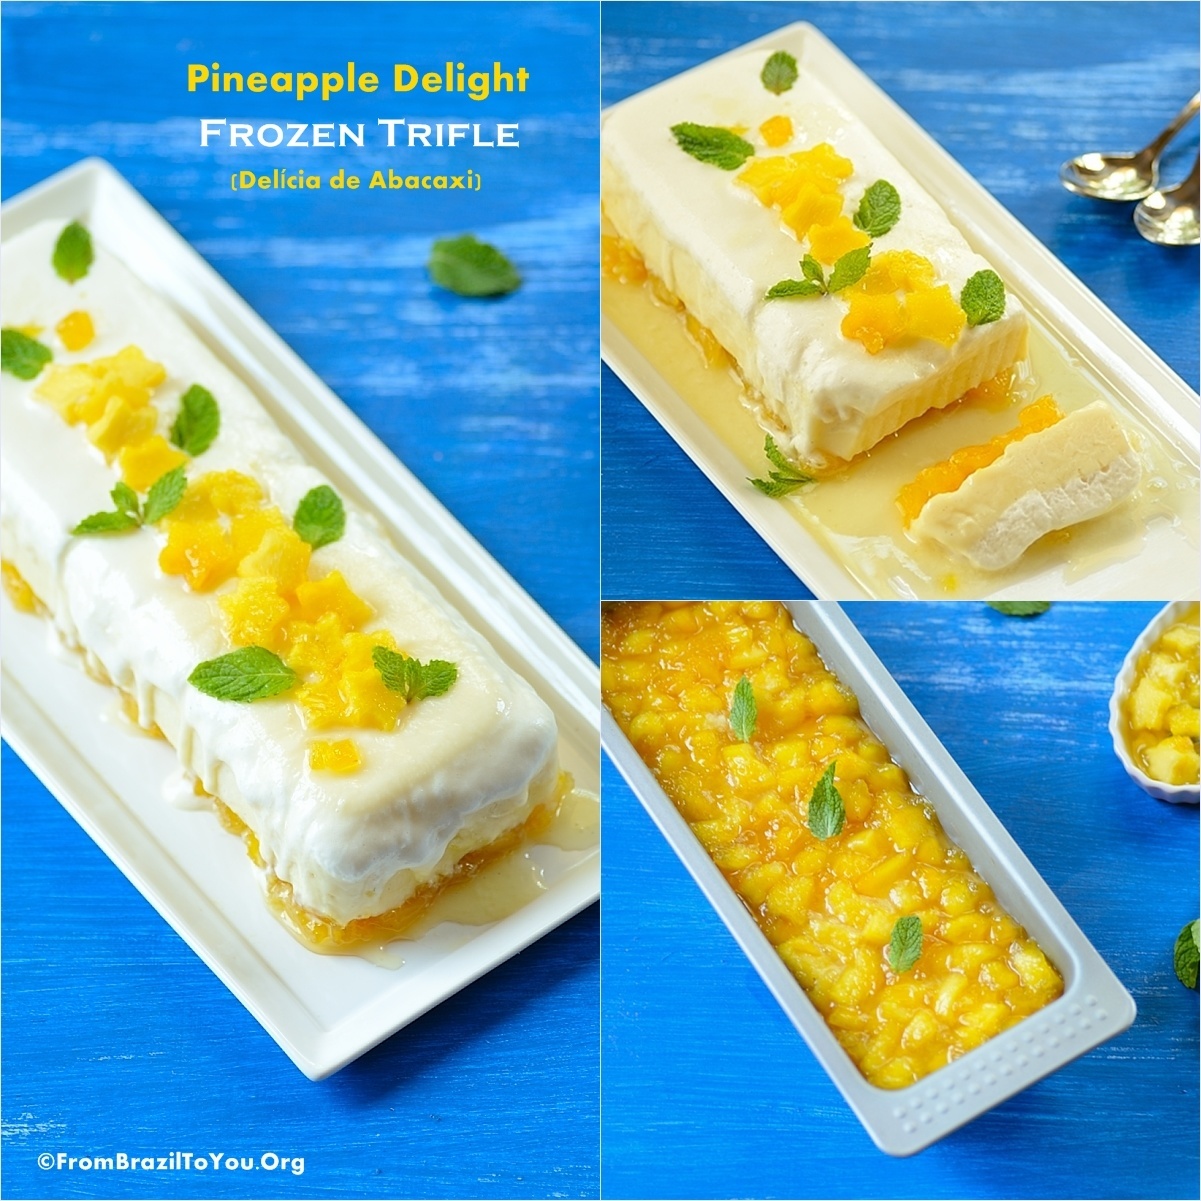 Pineapple Delight Frozen Trifle (Delícia de Abacaxi) -- A Three-layer frozen treat that is to die for!!!!